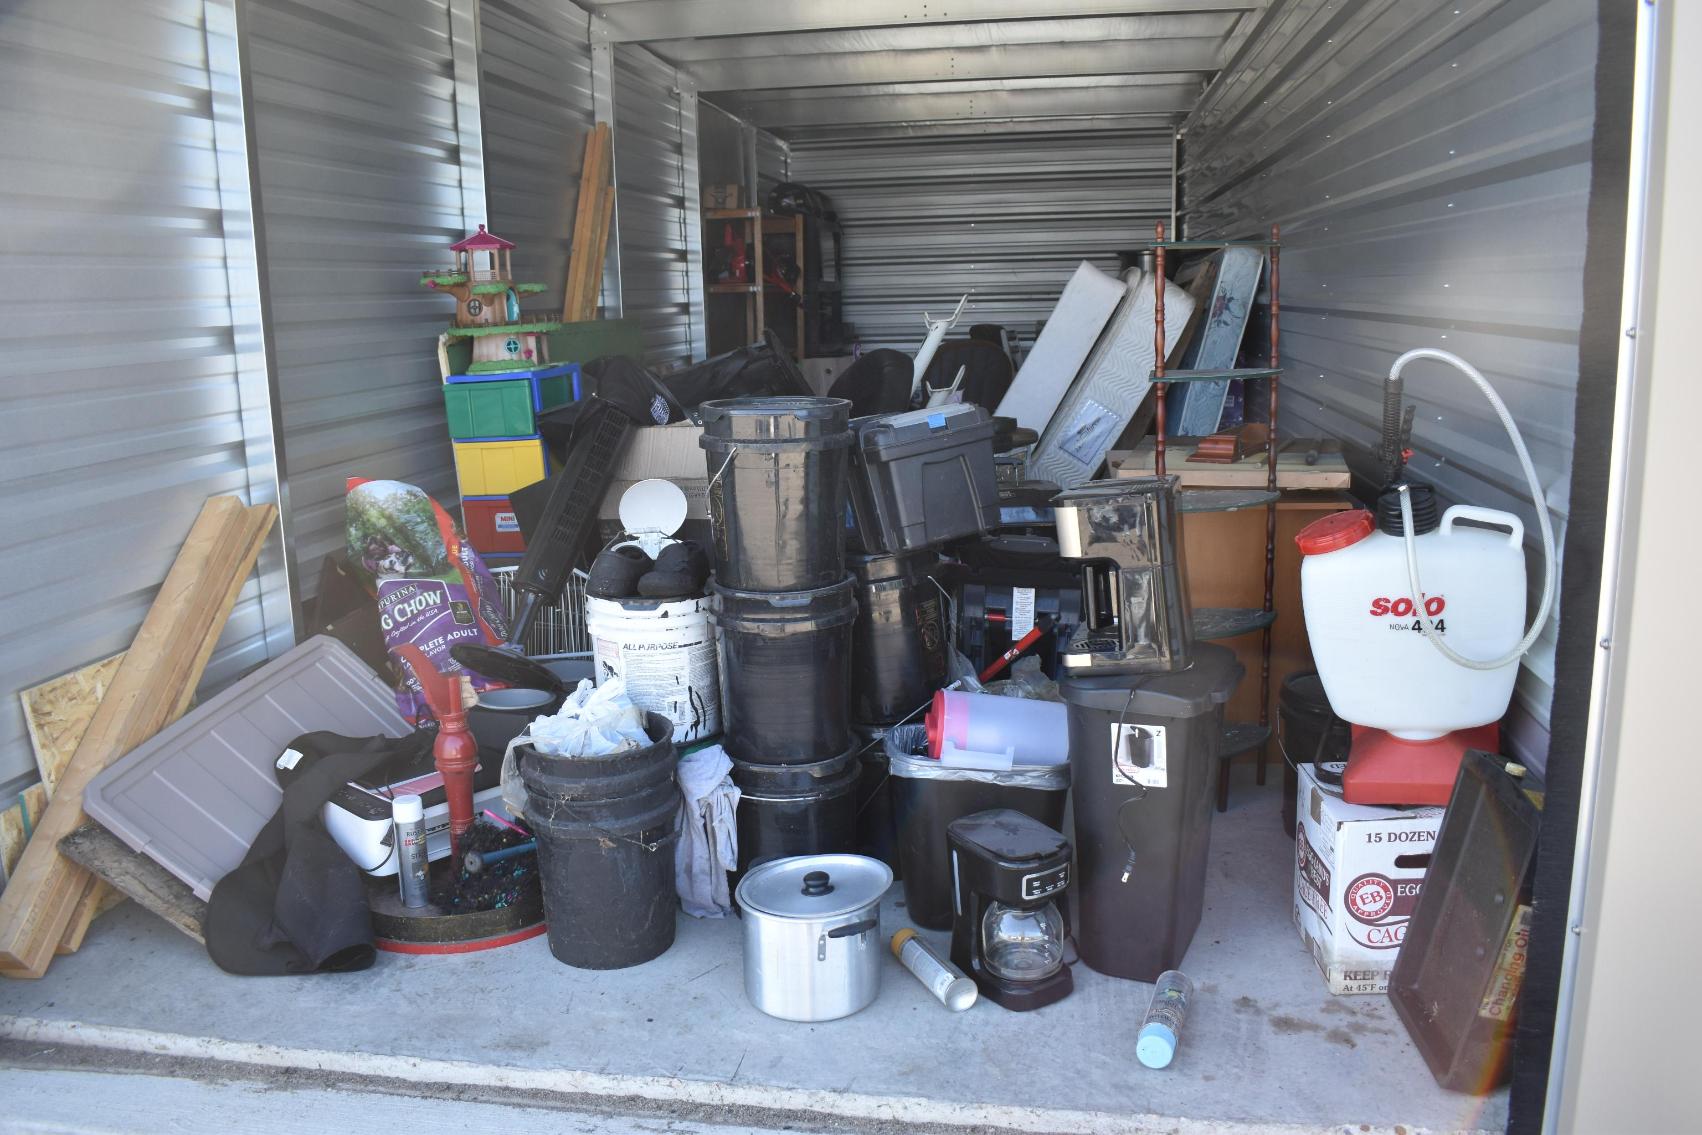 Contents of Storage Units